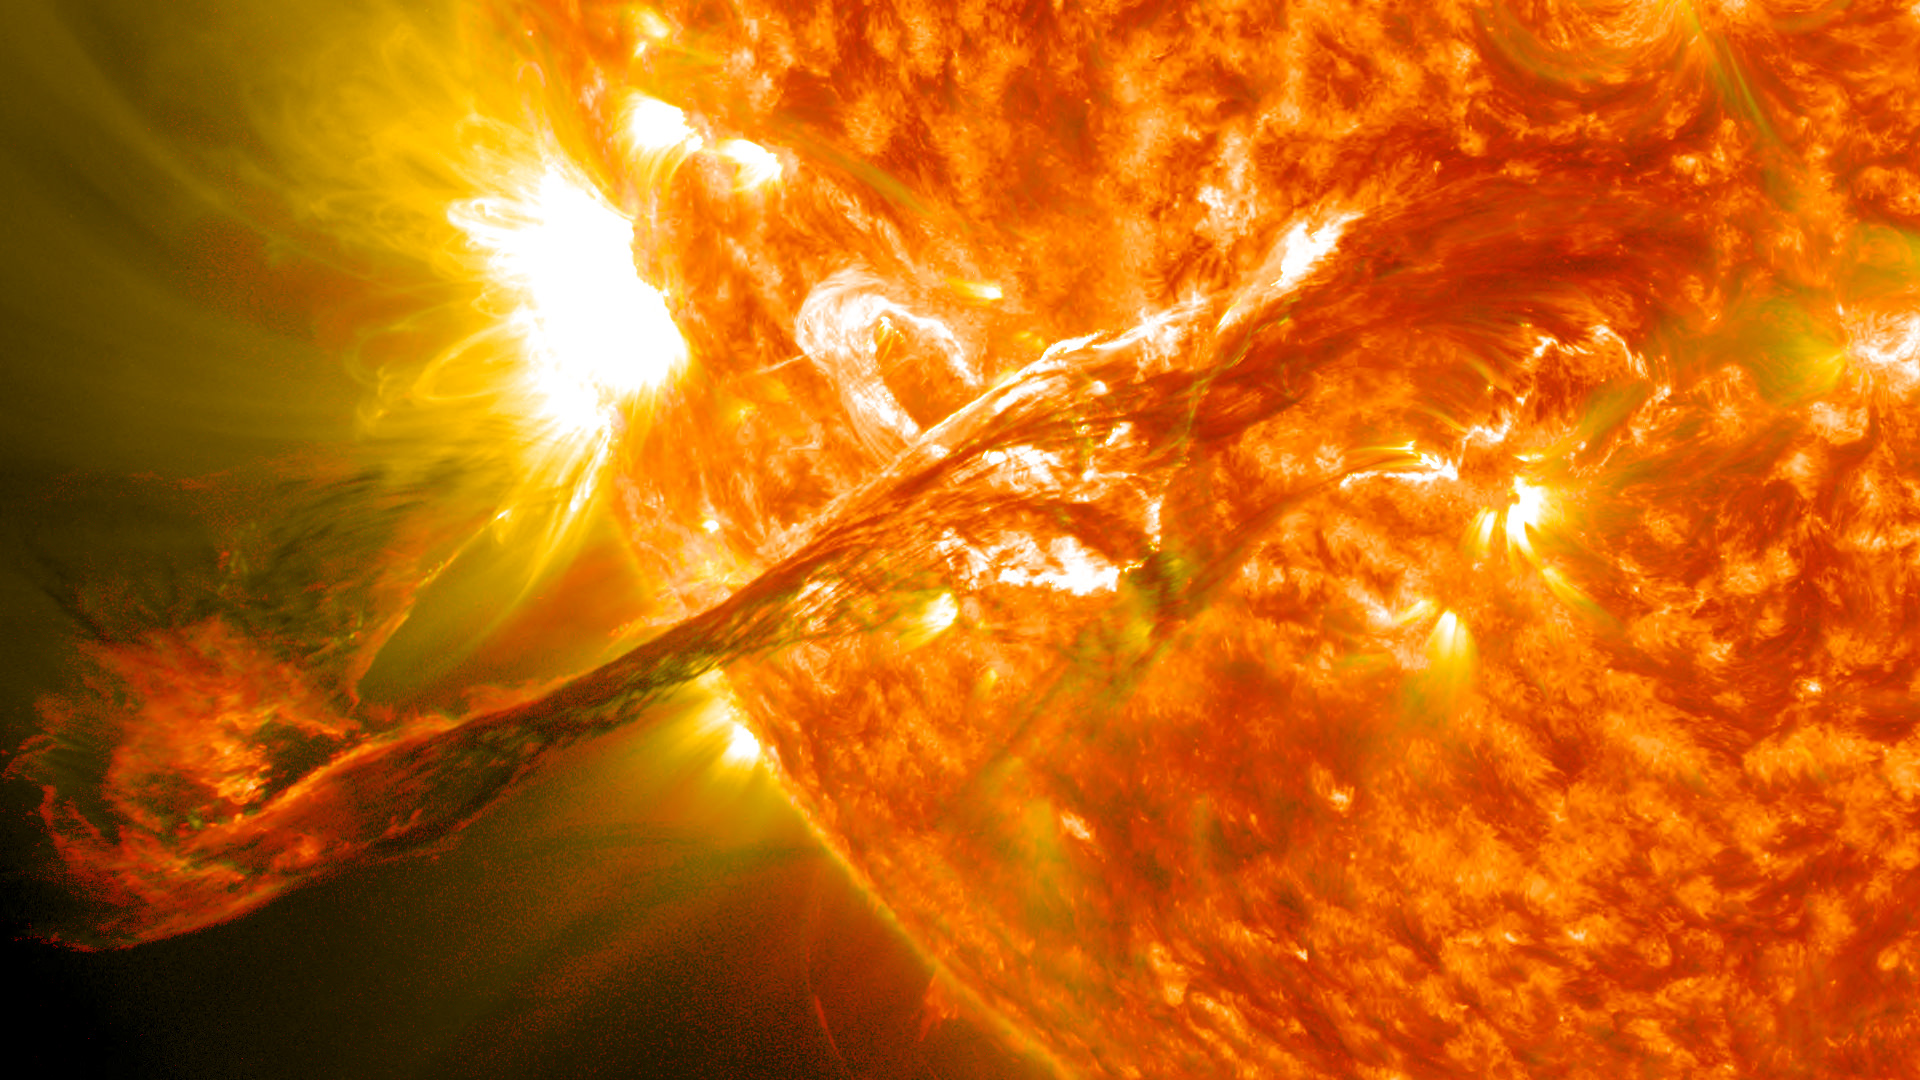 How Does The Sun Produce Energy Universe Today